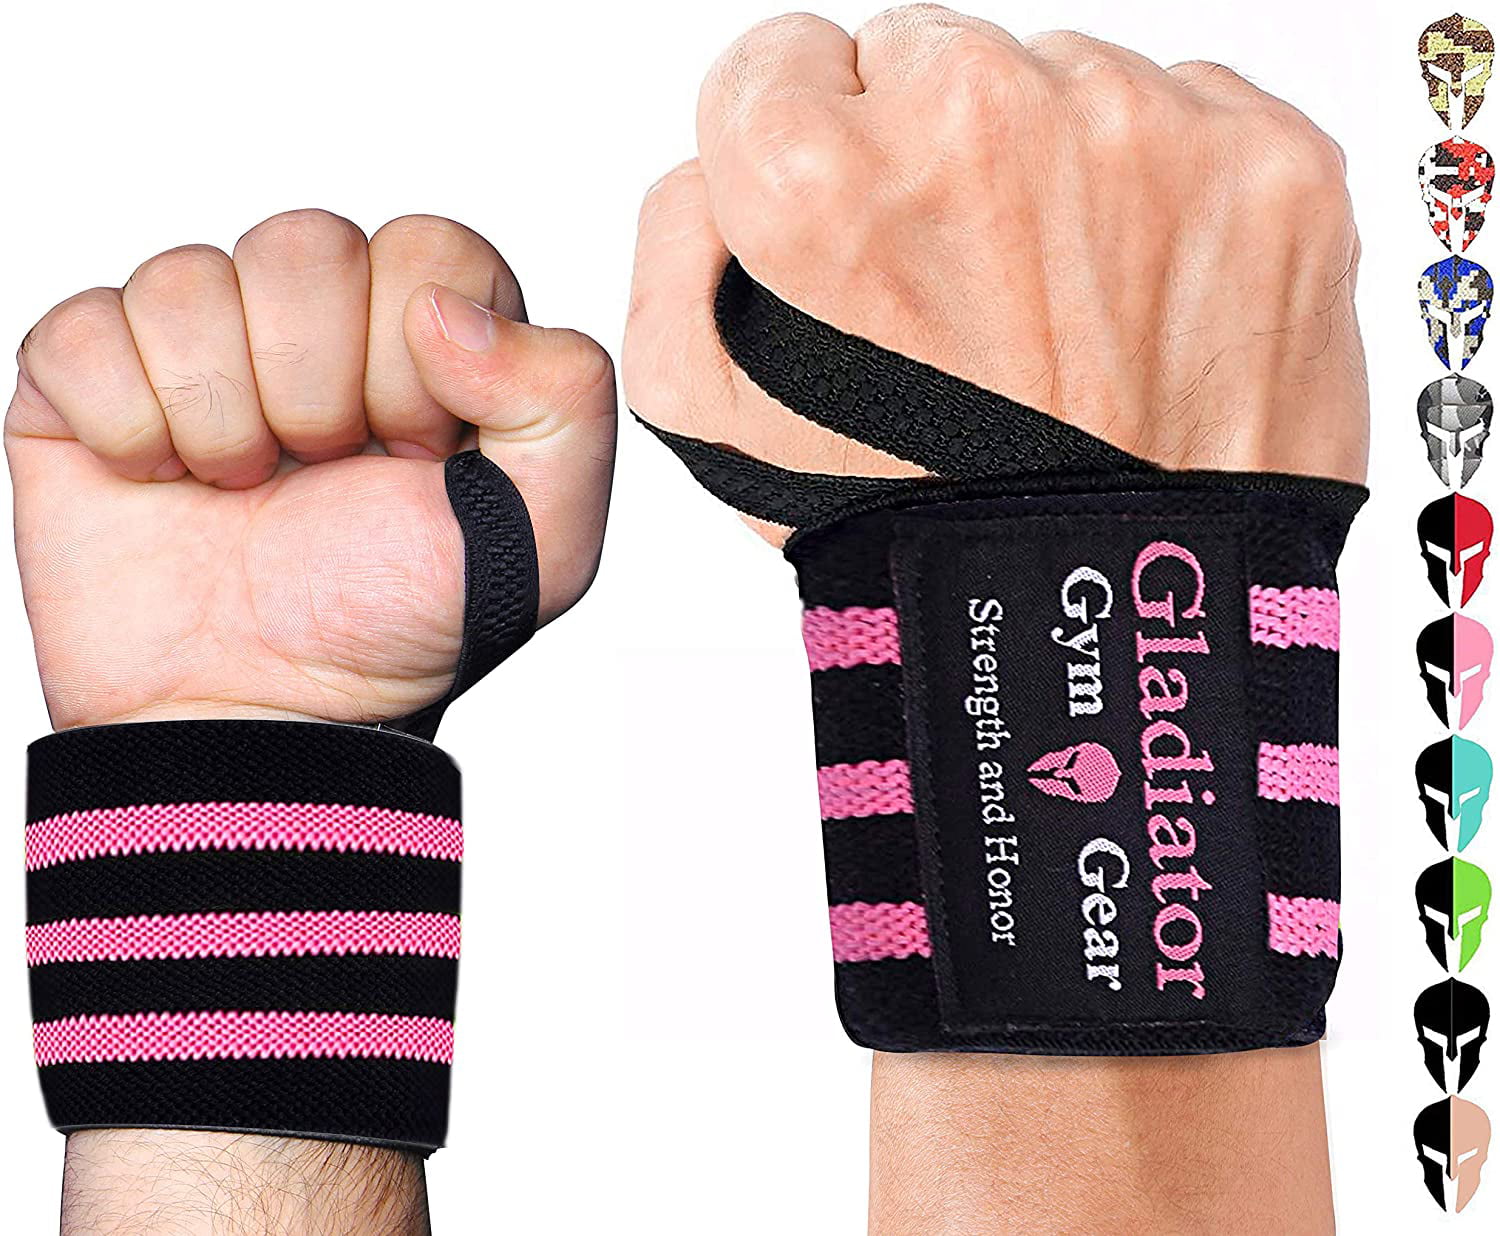 Hand Wraps Wrist Strap Crossfit Powerlifting Bodybuilding Support Weight Lifting 